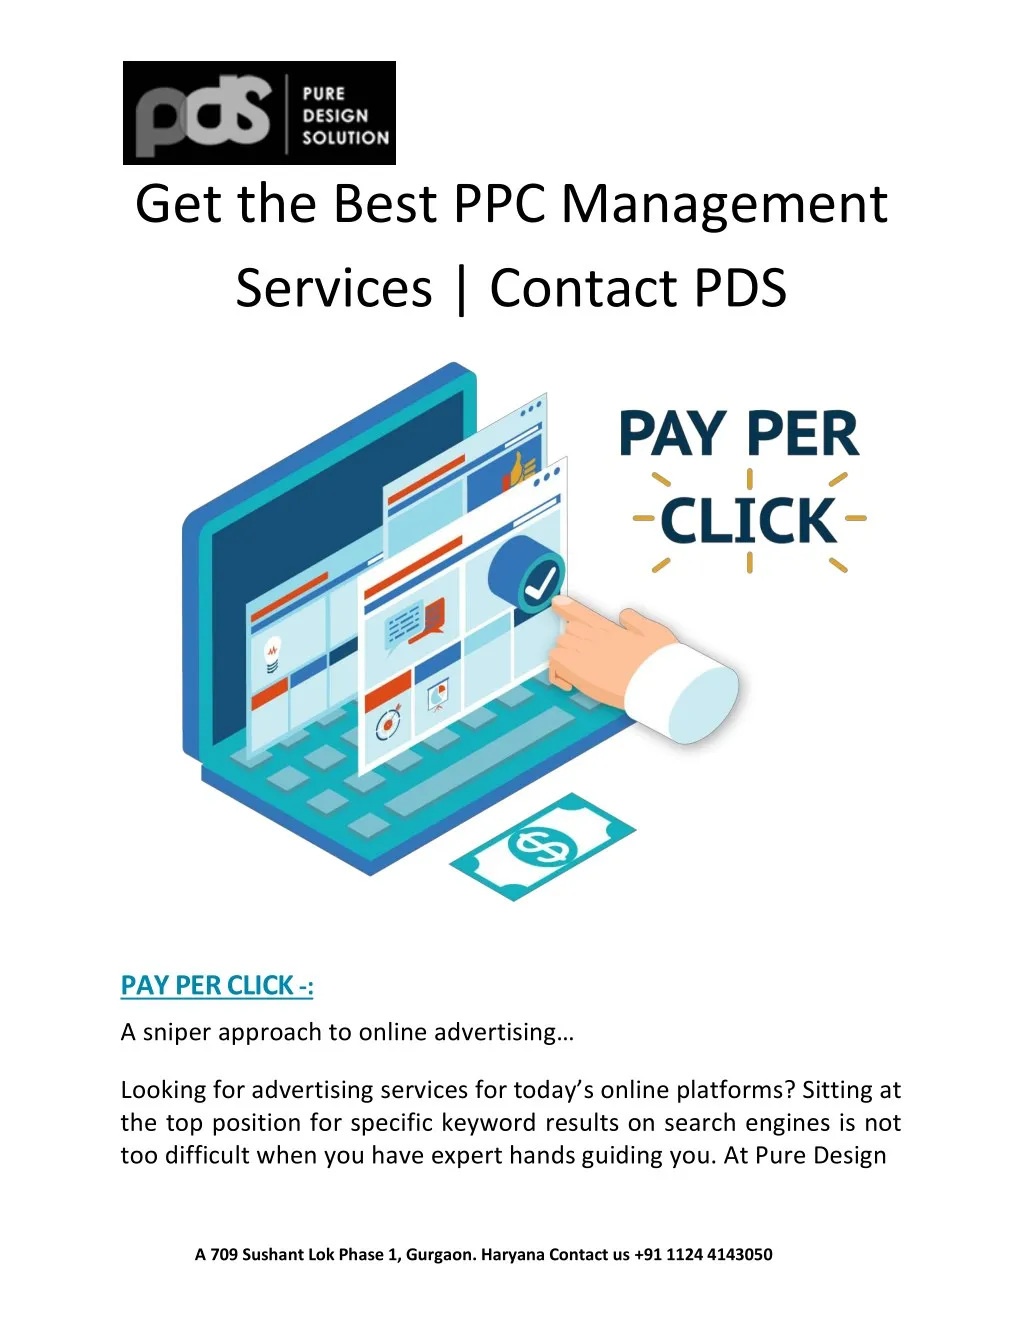 get the best ppc management services contact pds